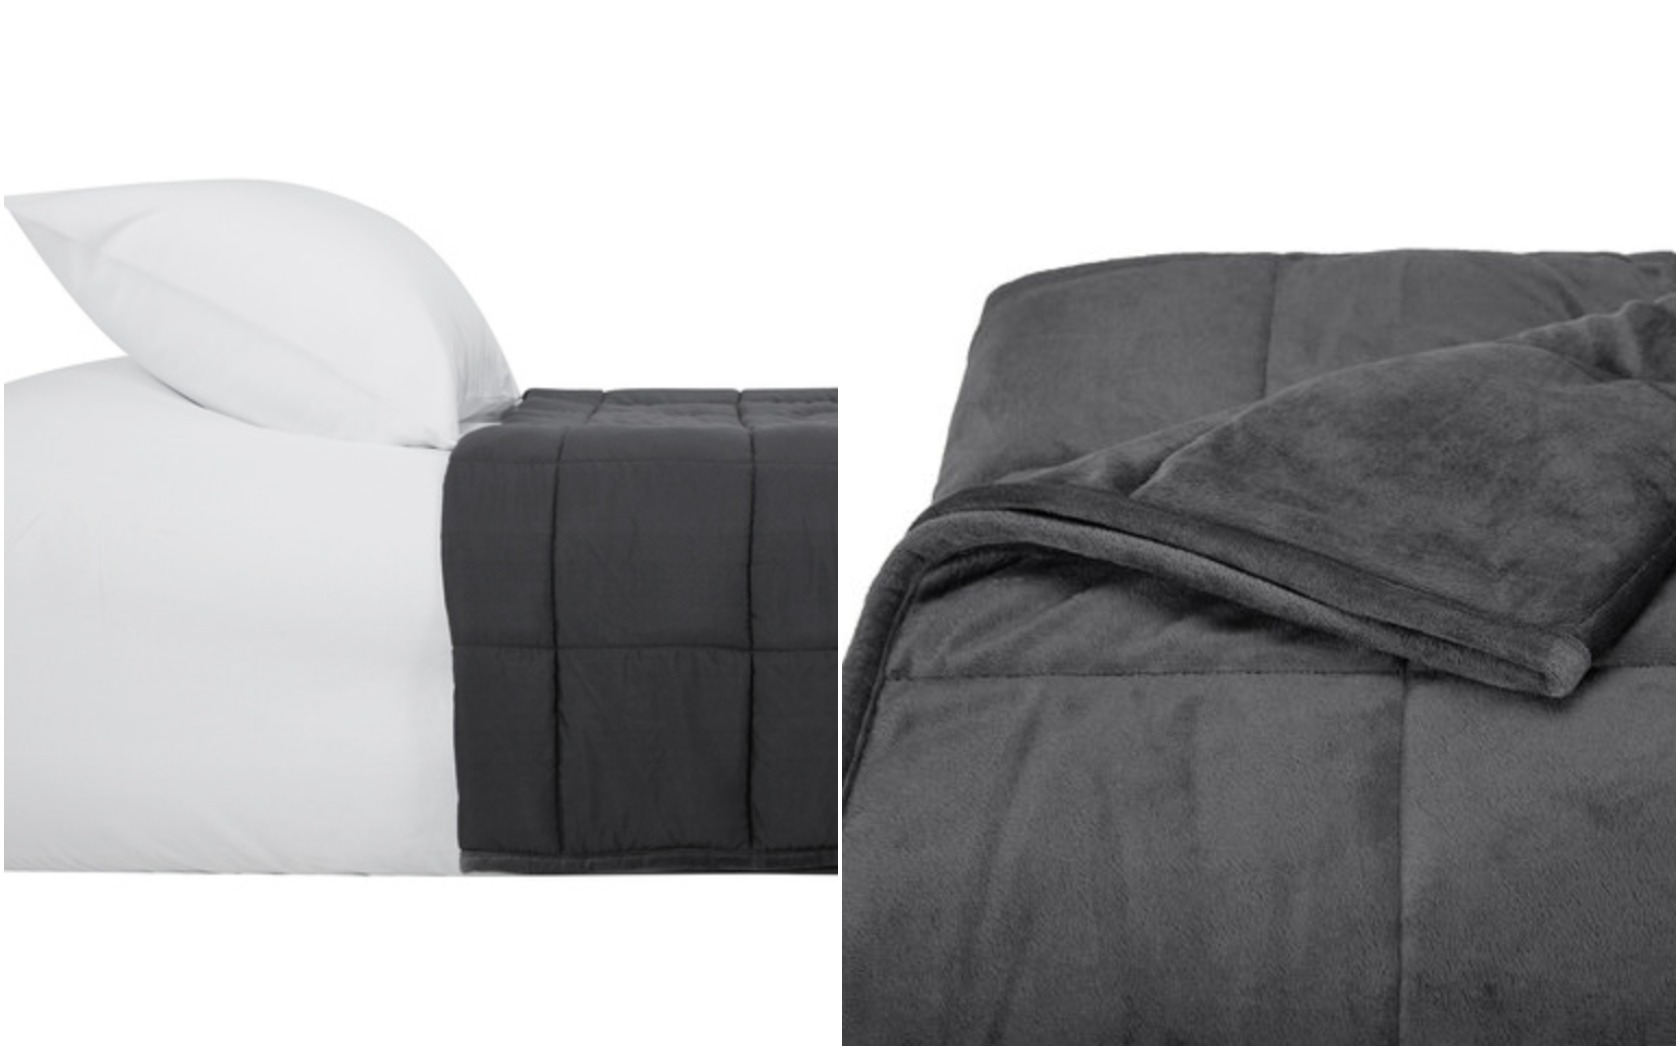 Buy weighted blankets kmart> OFF-54%